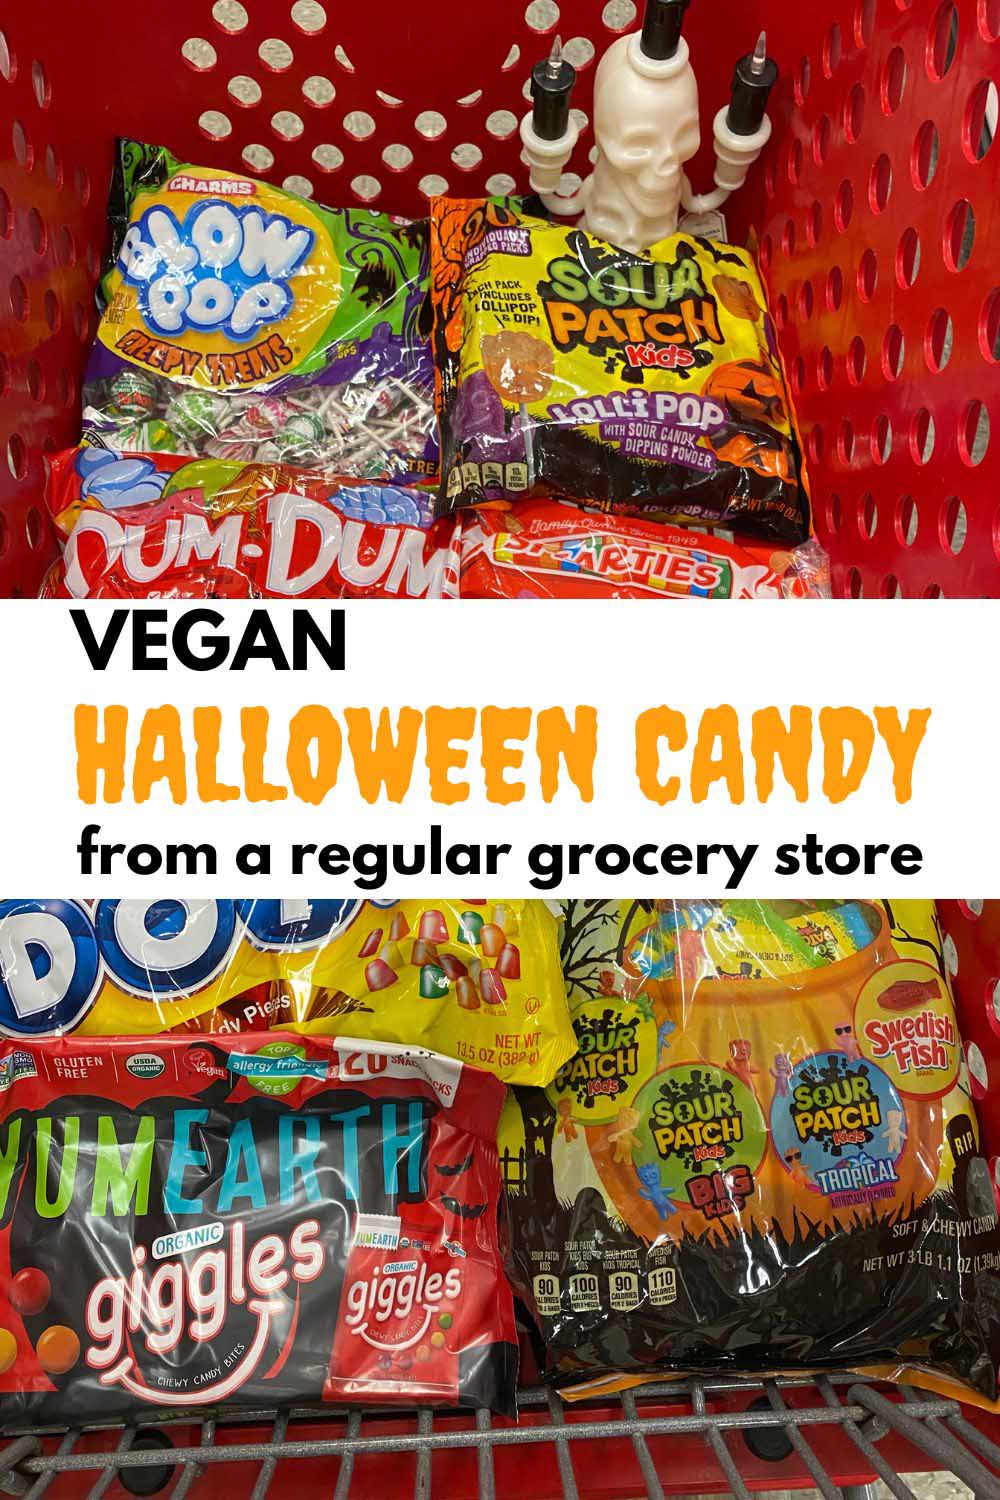 photo of vegan Halloween candy in a shopping cart, text overlay